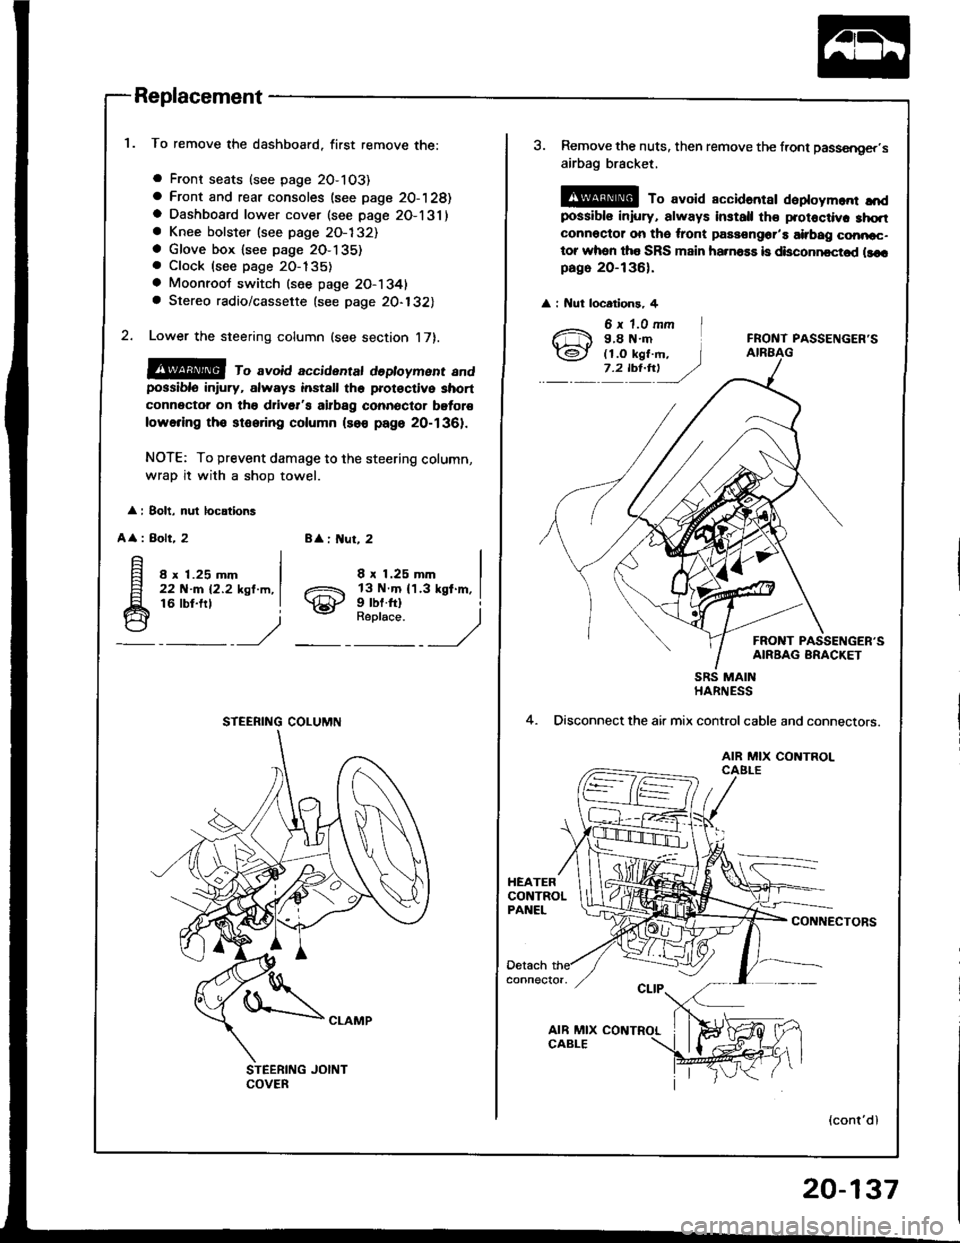 ACURA INTEGRA 1994  Service Repair Manual Replacement
To remove the dashboard, first remove the:
a Front seats (see page 2O-103)
a Front and rear consoles (see page 20-128)a Dashboard lower cover (see page 2O-131)a Knee bolster (see page 2O-1